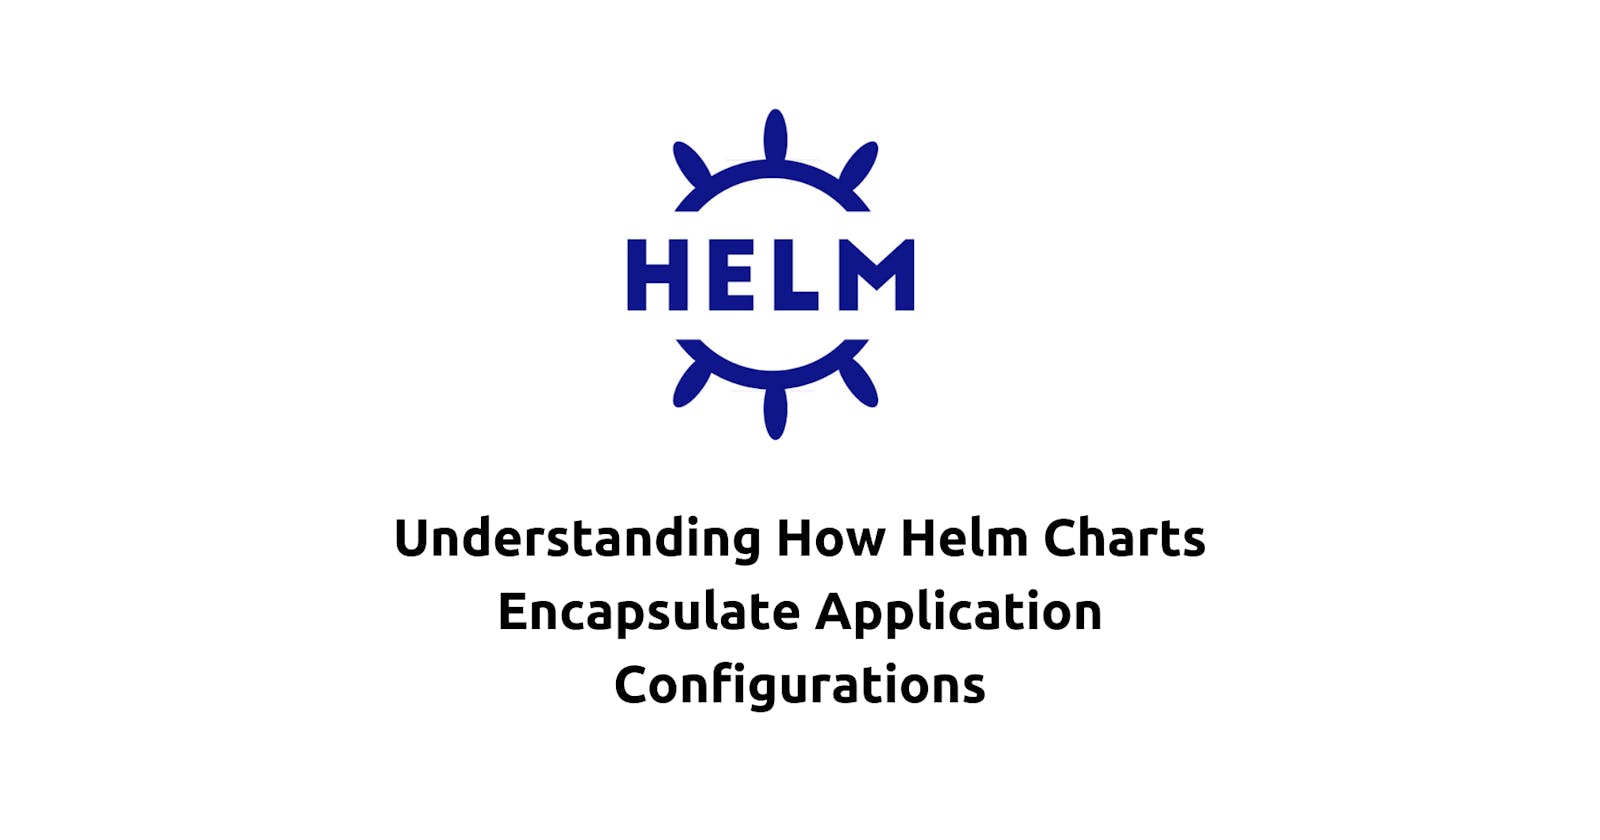 Understanding How Helm Charts Encapsulate Application Configurations